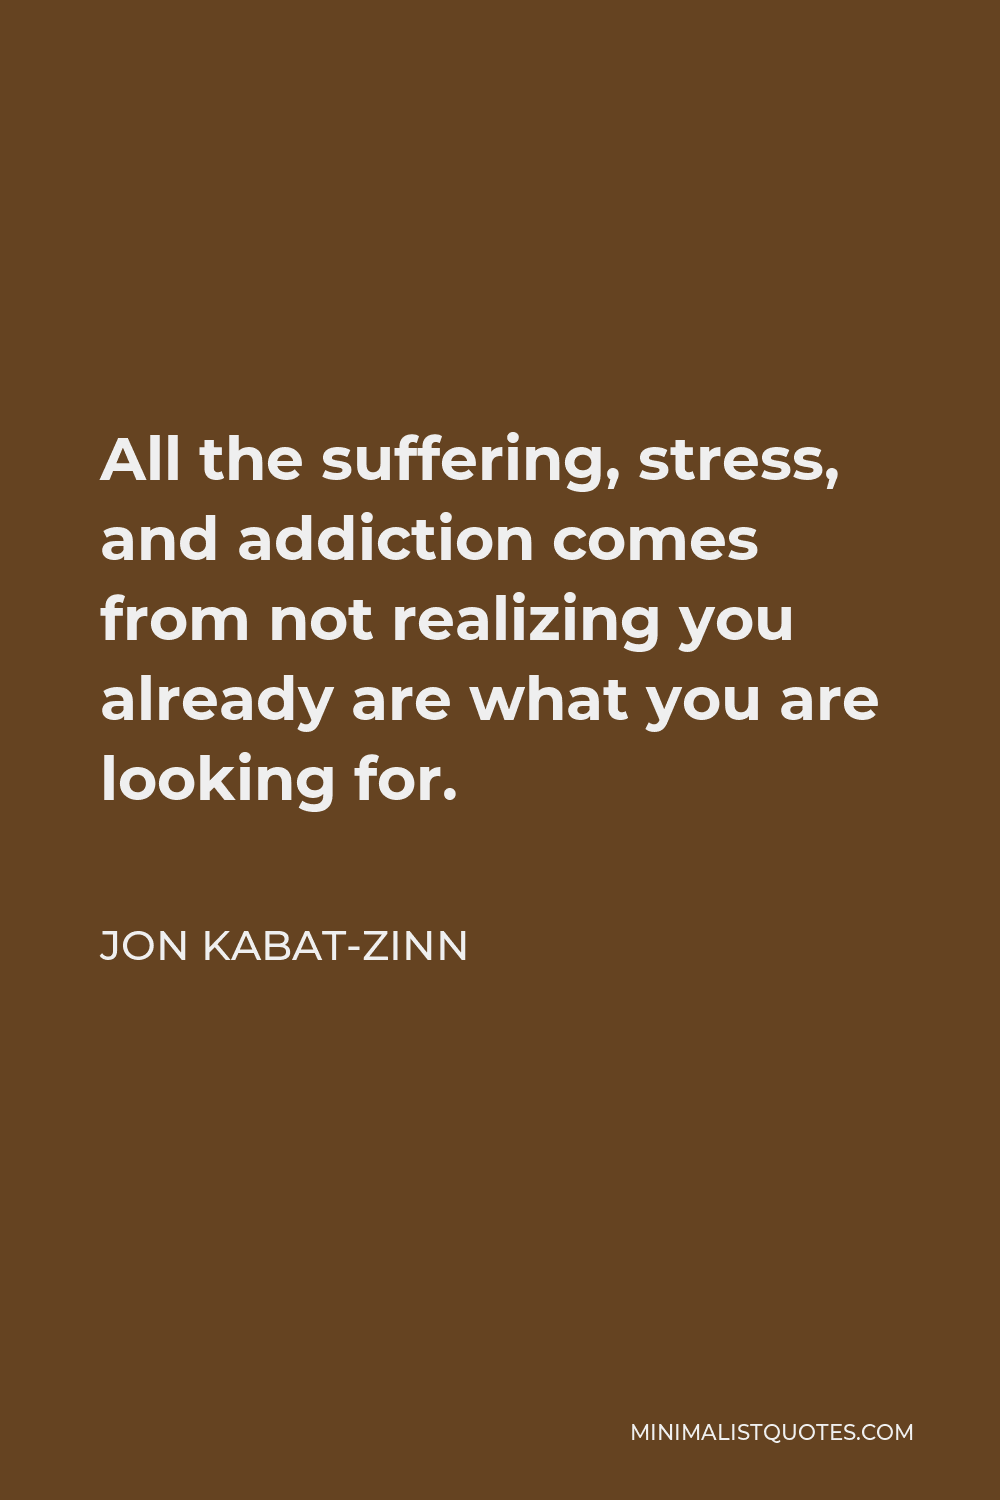 Jon Kabat-Zinn Quote - All the suffering, stress, and addiction comes from not realizing you already are what you are looking for.